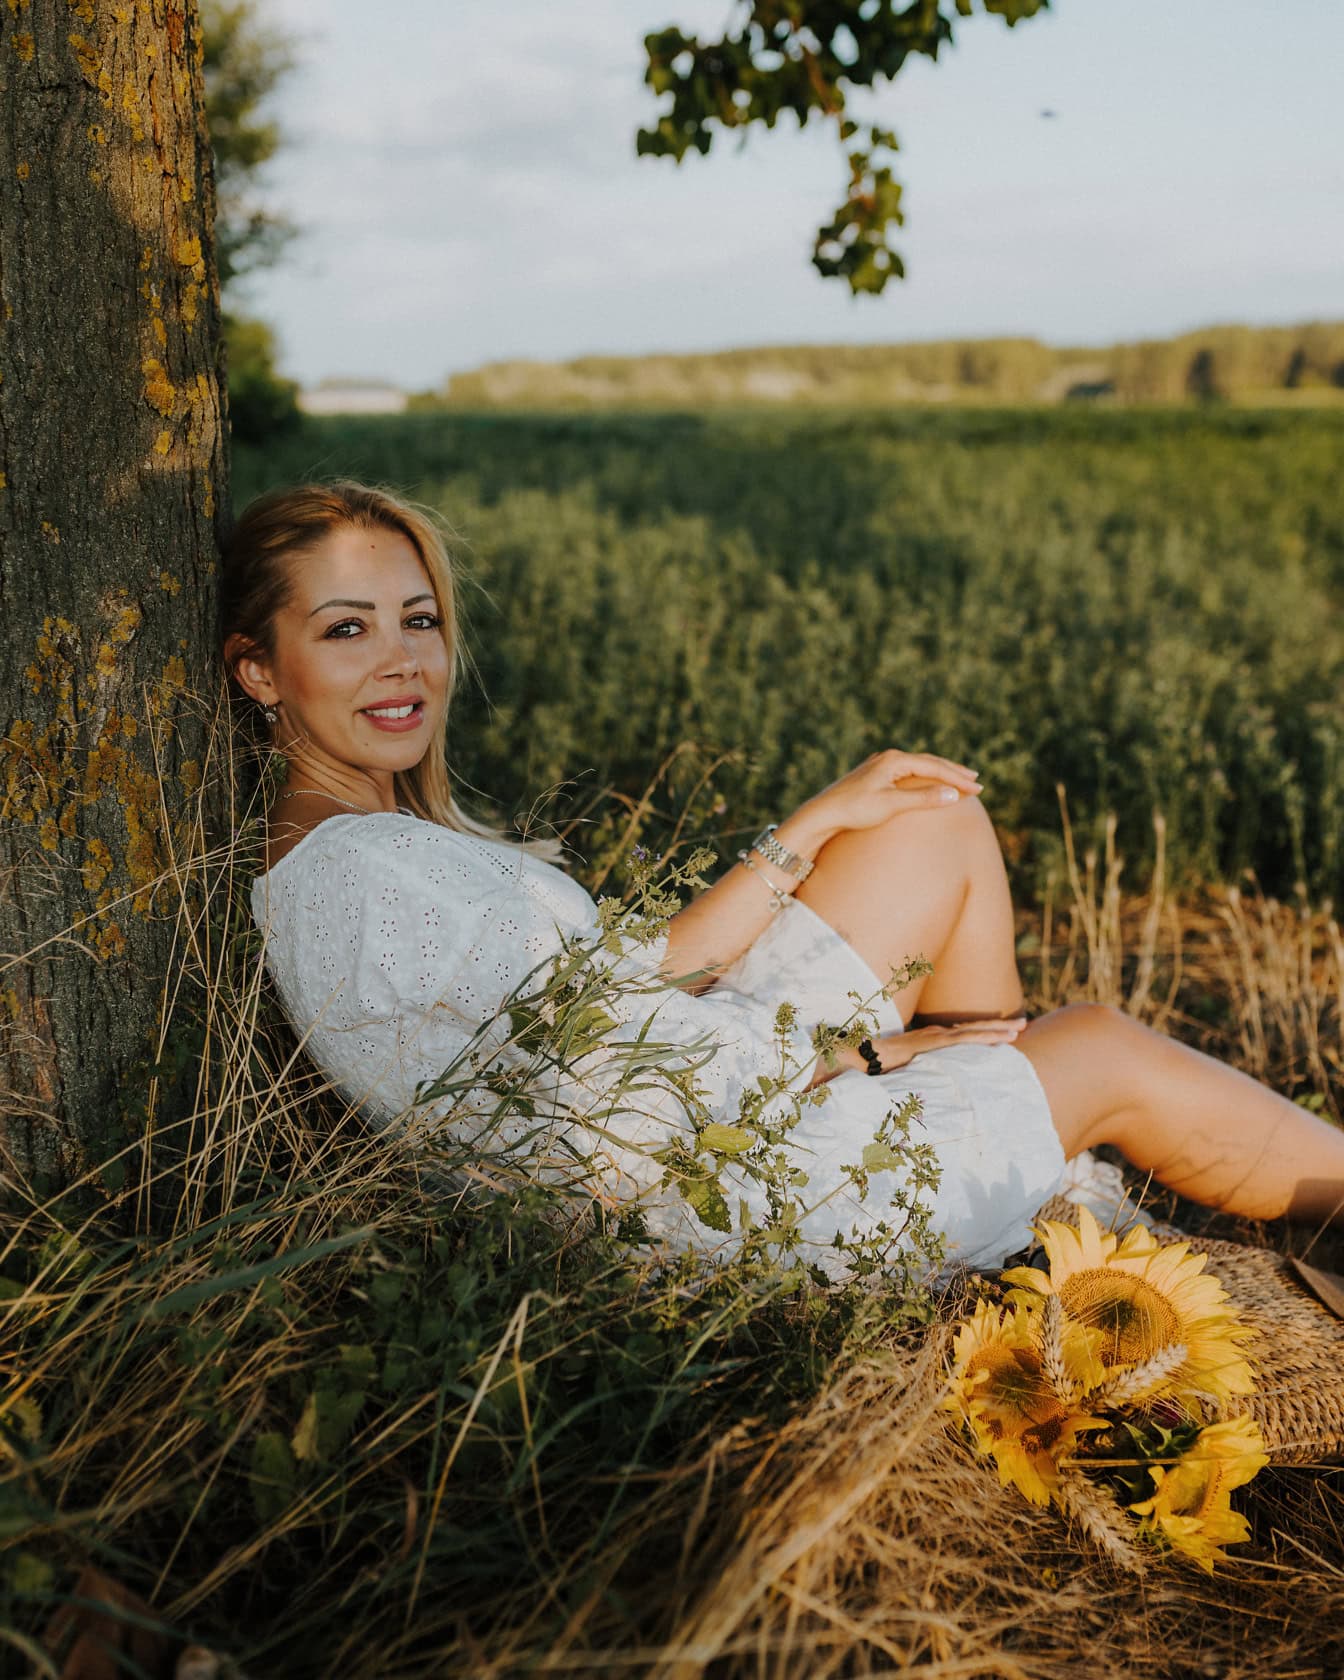 Portrait of a stunningly beautiful blonde sitting in the grassy meadow underneath a tree